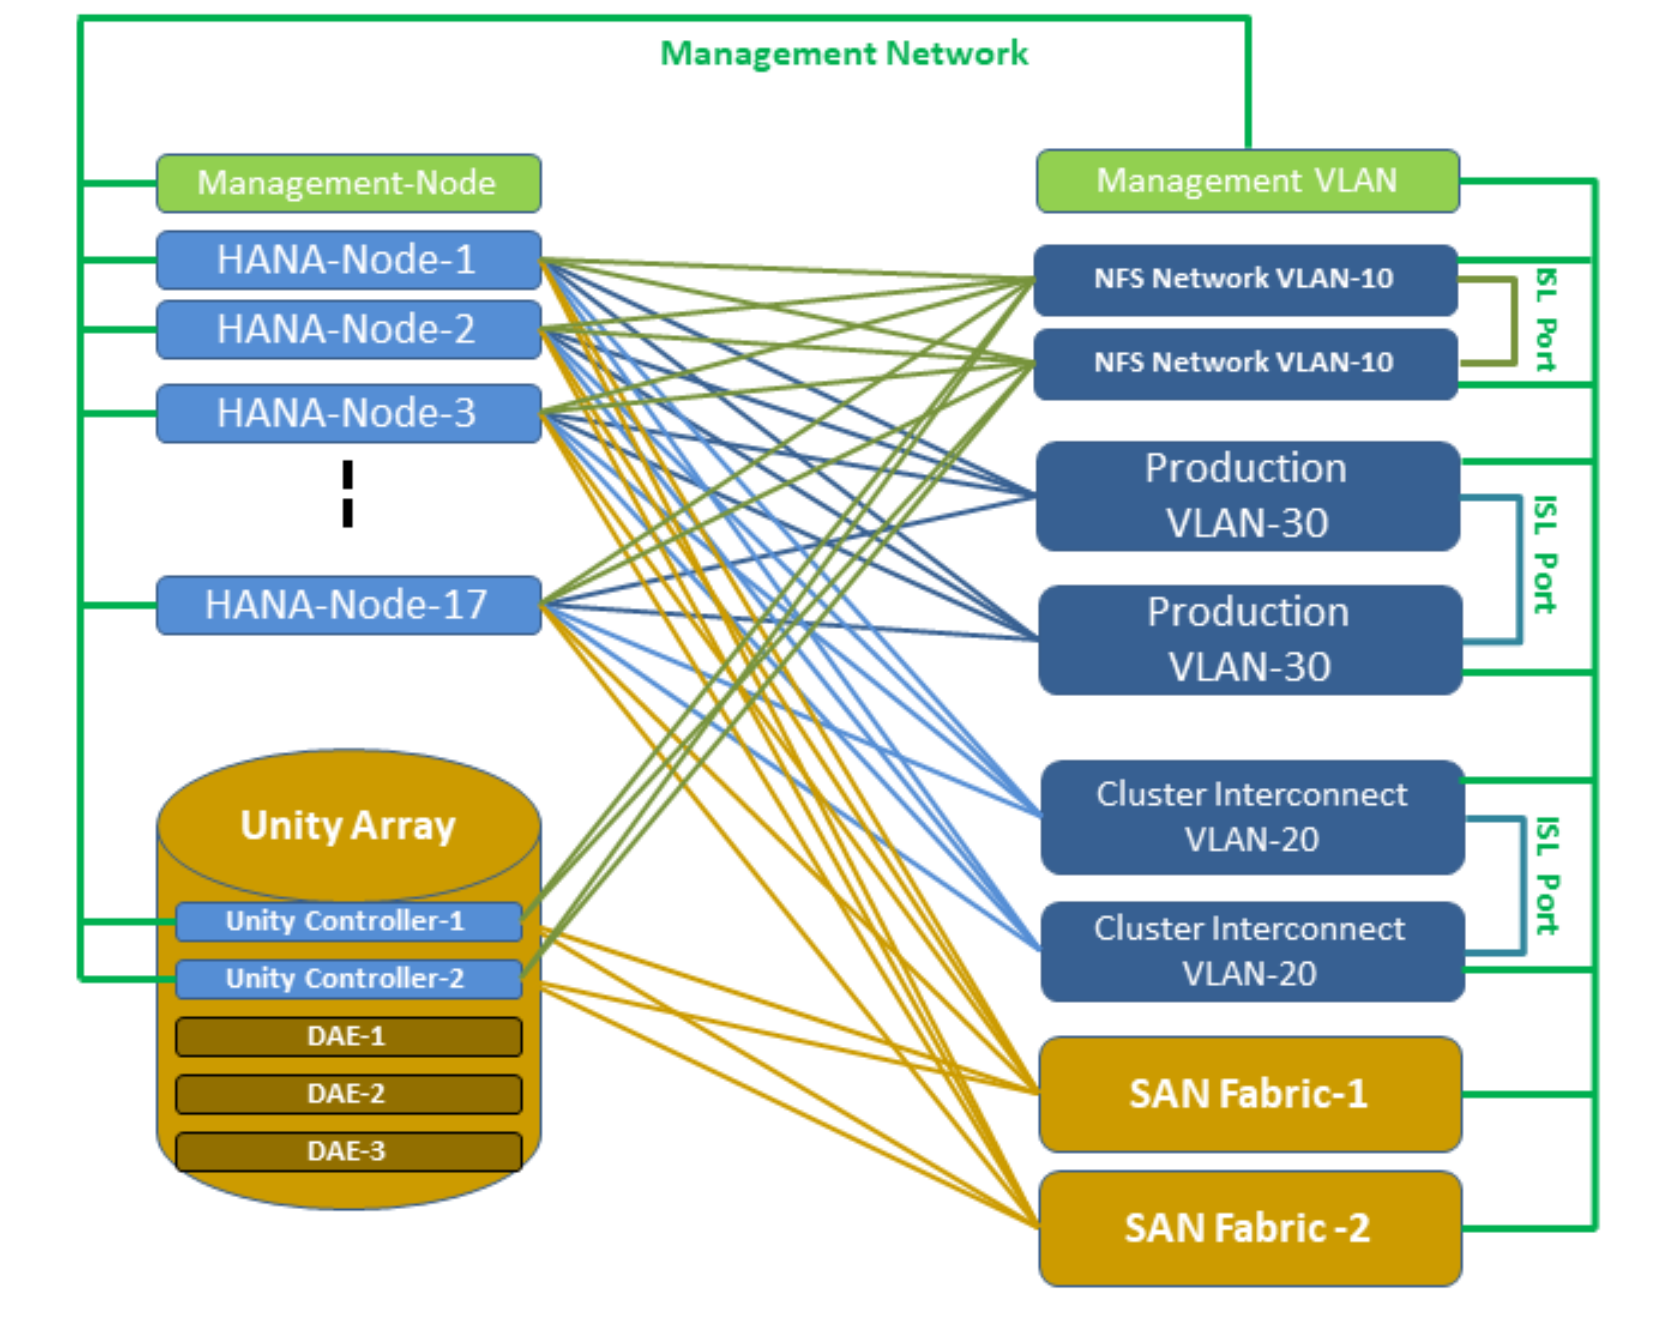 Network requirements diagram. The diagram shows an SAP HANA scale-out network configuration using MX9116n/MX7116n switches